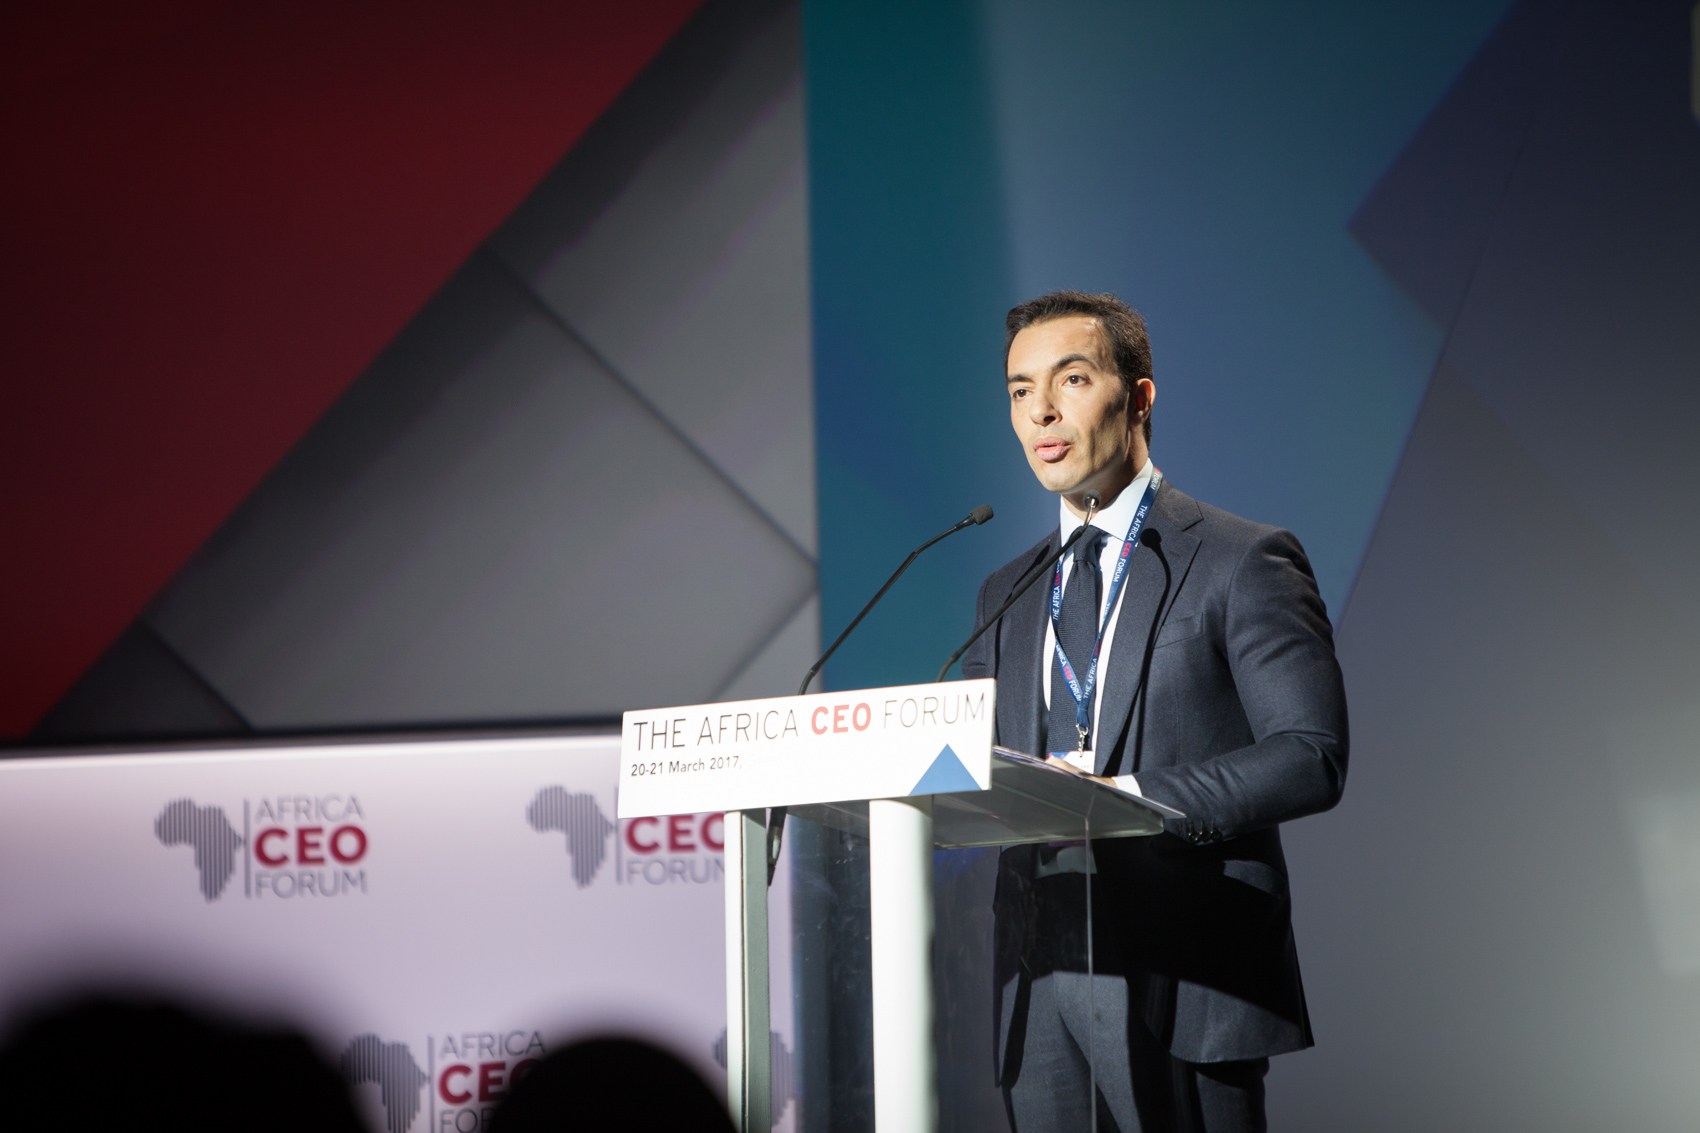 Amir Ben Yahmed, Managing Director,Jeune Afrique Media Group and Chairman of the Africa CEO Forum